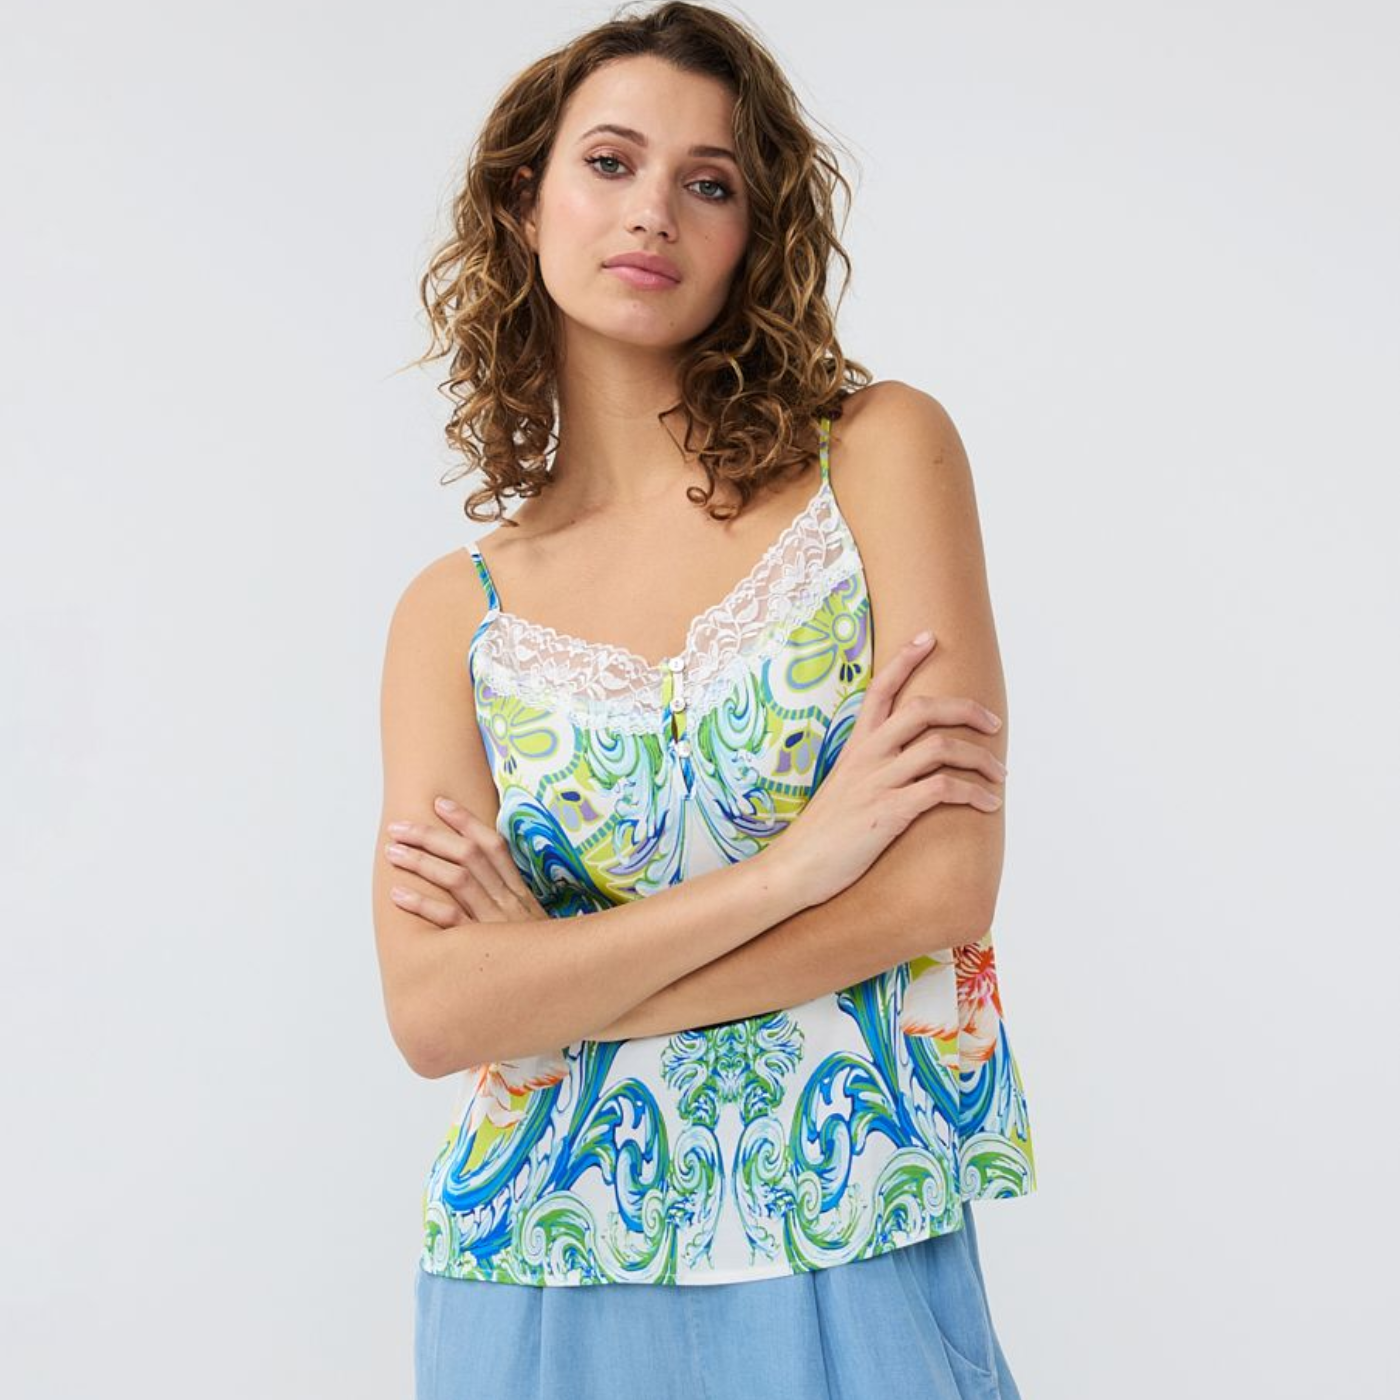 female model wearing esqualo camisole top in print colour with arms folded looking at camera